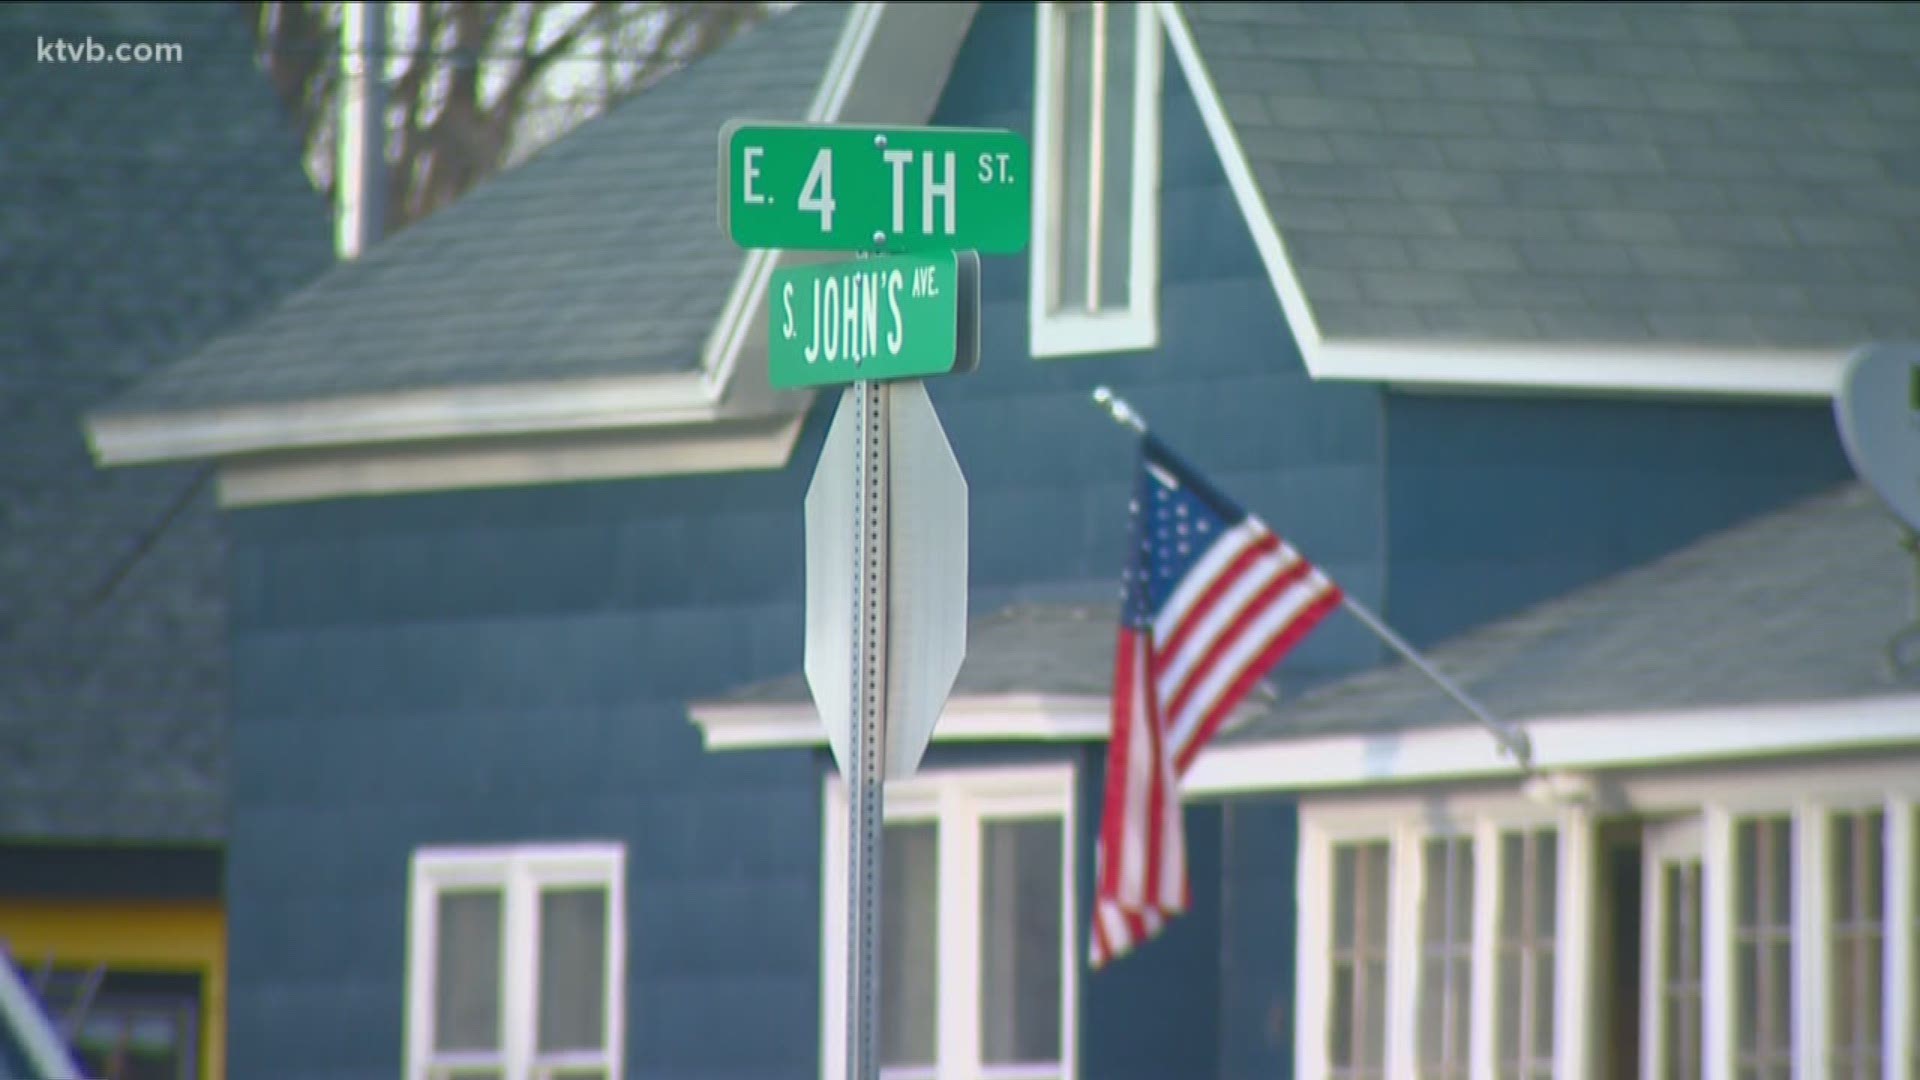 Some residents are concerned about safety at the intersection of 4th Street & South Johns Avenue, a popular spot for students walking to school.